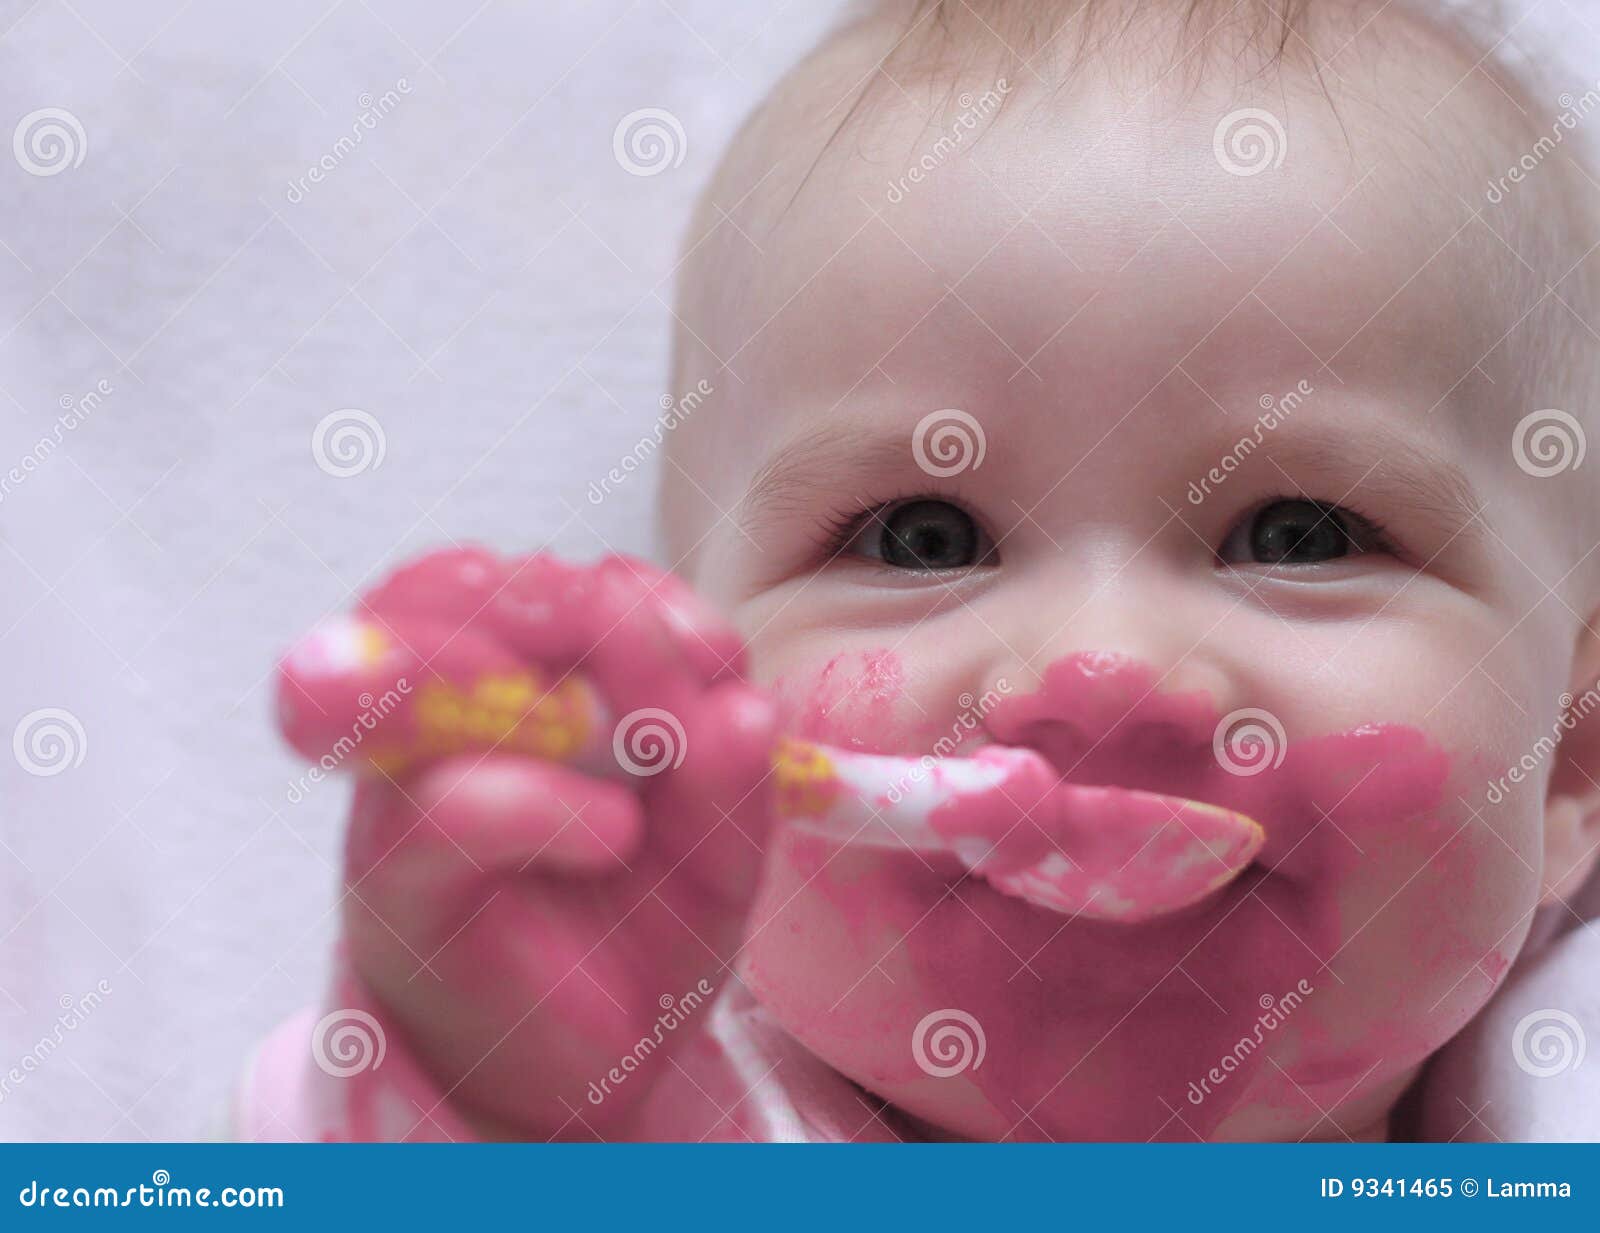 Happy Baby With A Spoon In The Mouth Royalty Free Stock ...